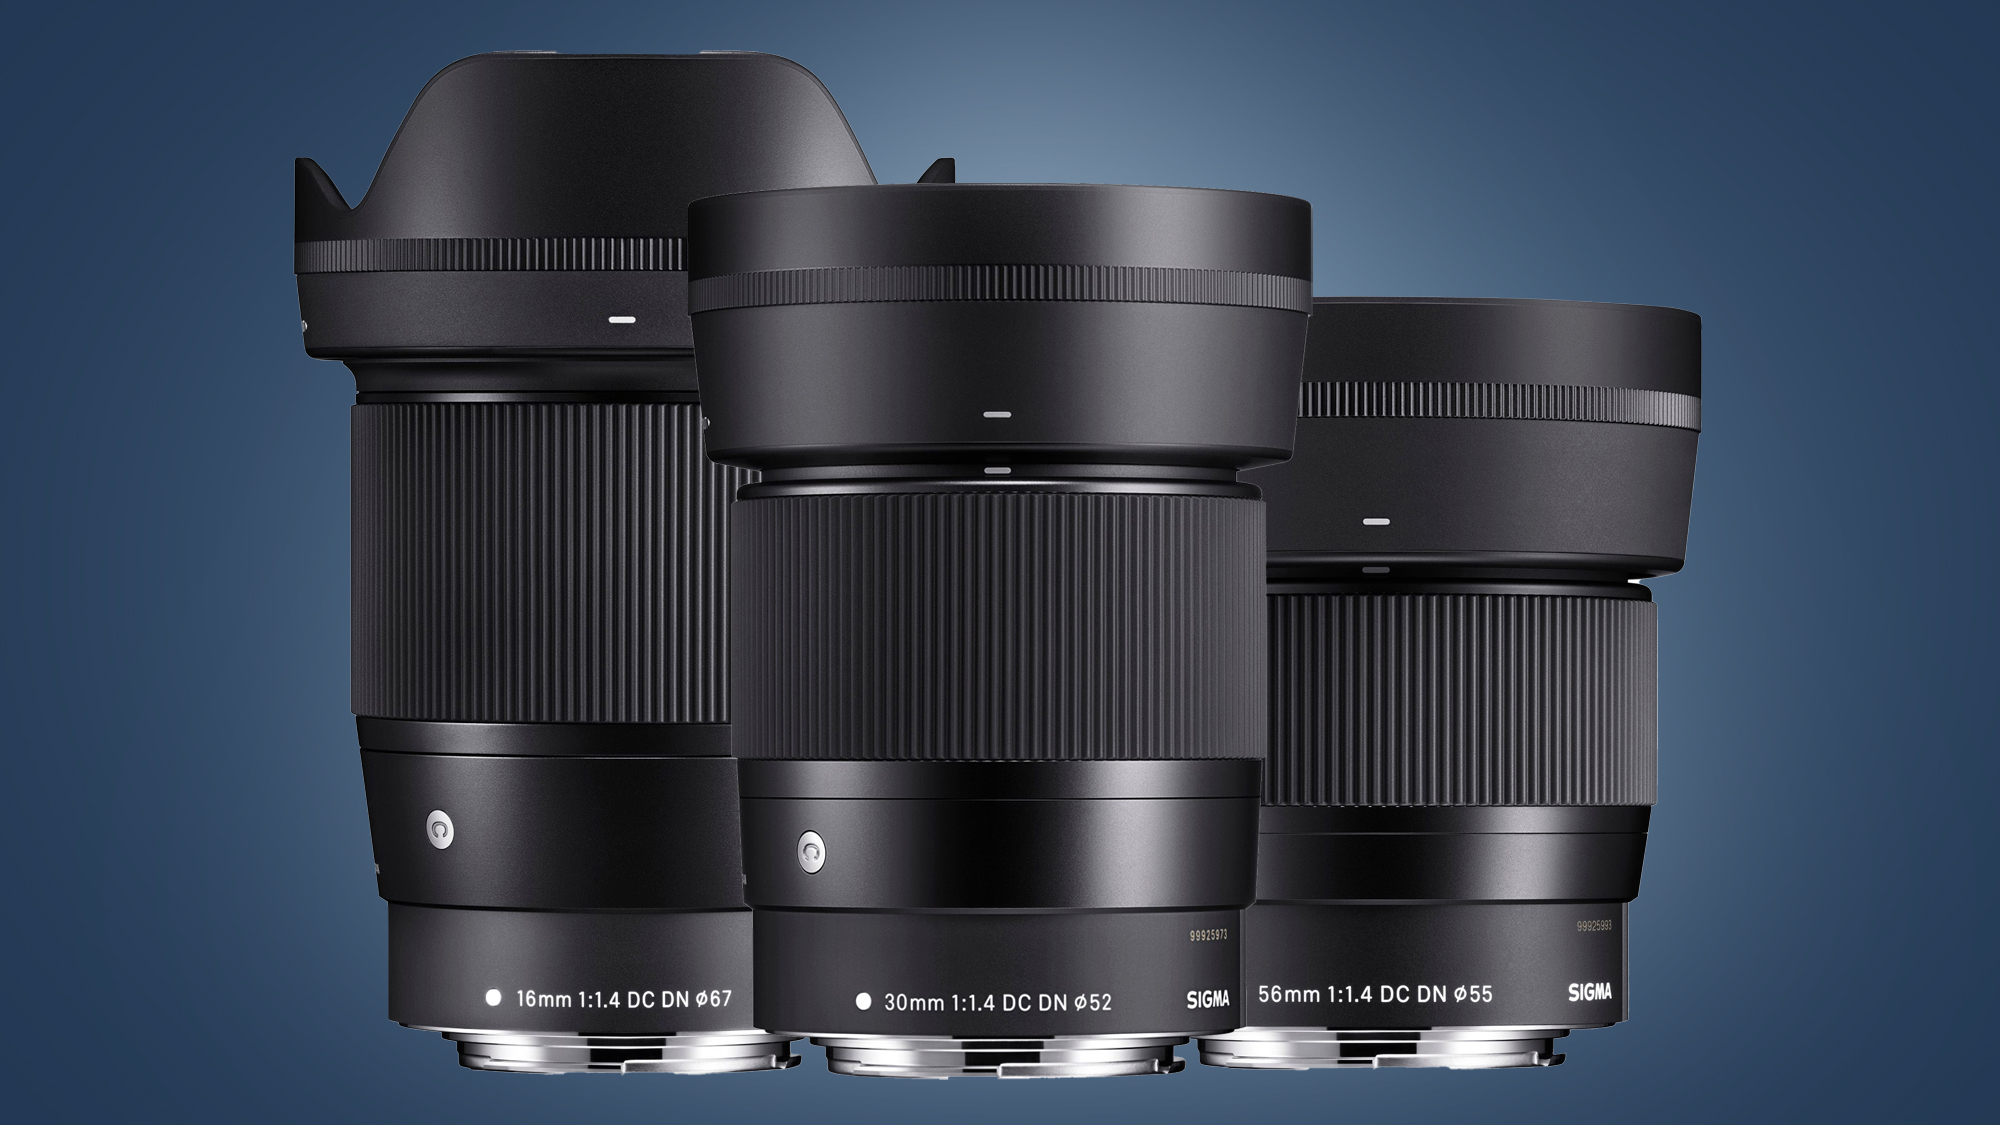 Fujifilm cameras get first ever Sigma lenses, but not the ones fans wanted